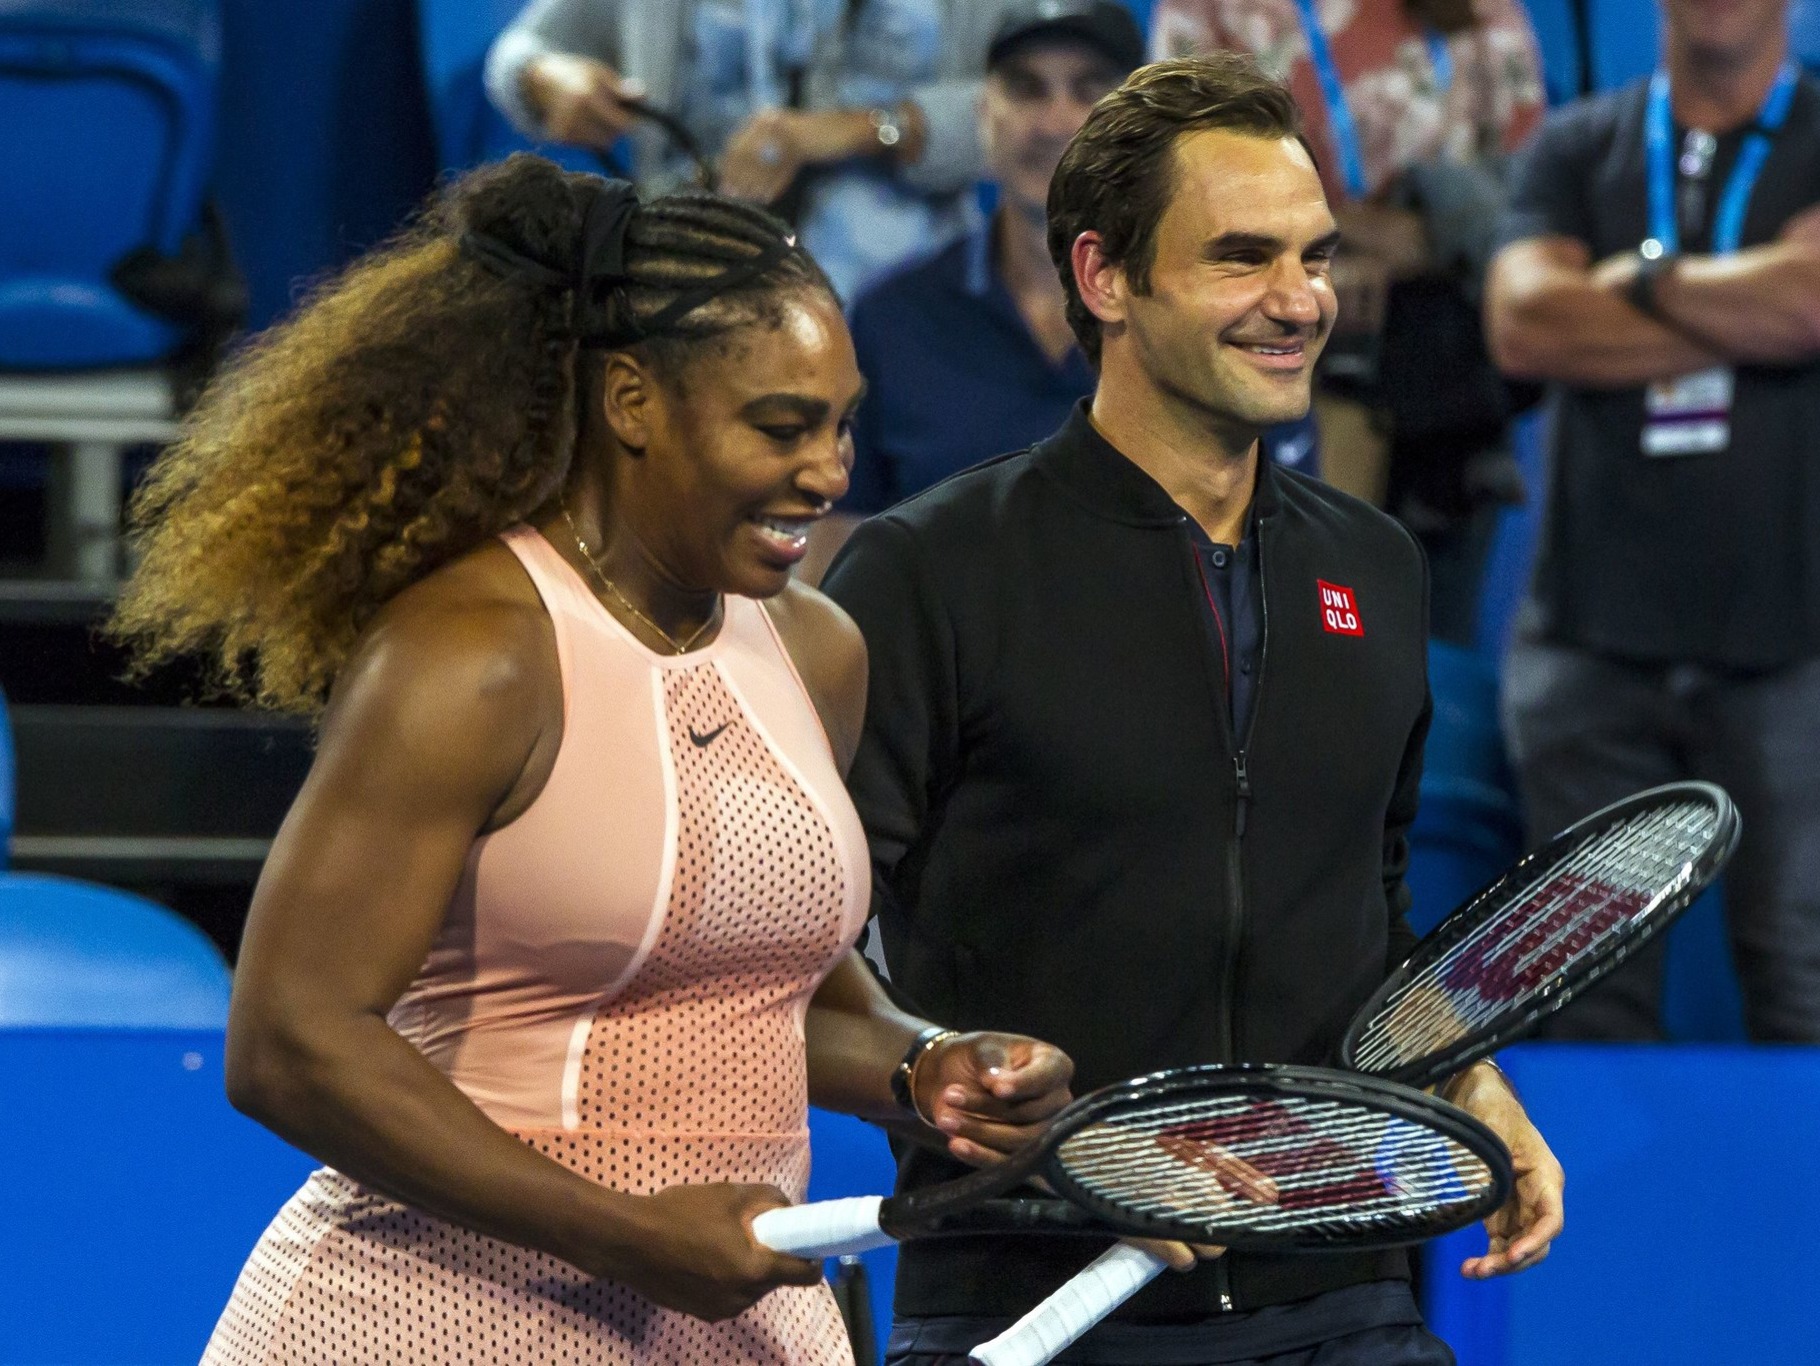 Australian Open: Roger Federer, Rafael Nadal, Serena Williams, and Others  in Funny Interviews and Press Conferences